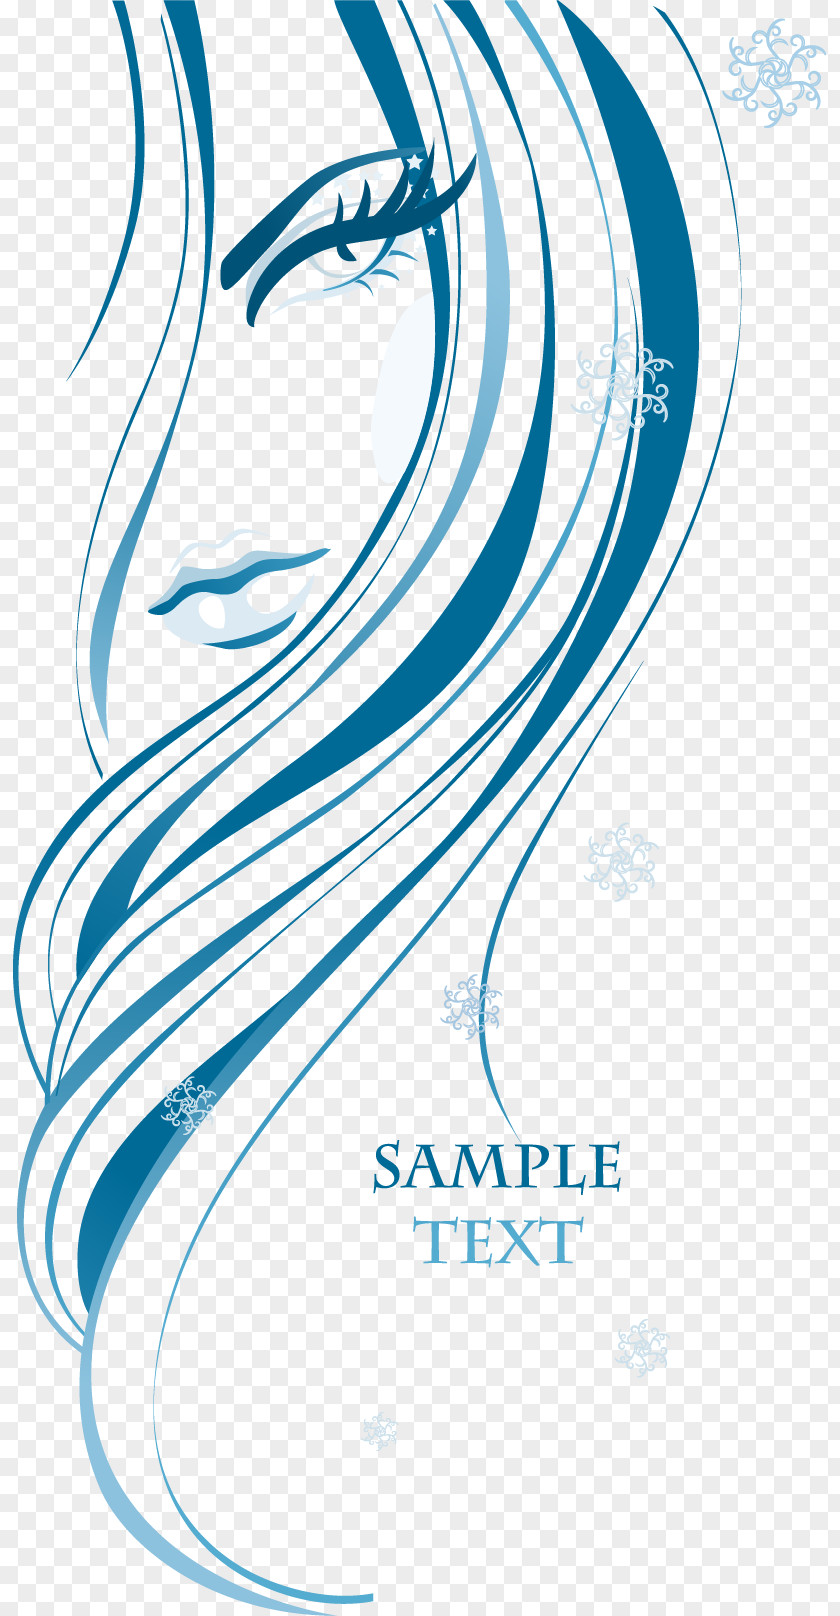 Girls Avatar Vector Elements Female Royalty-free Stock Photography Illustration PNG